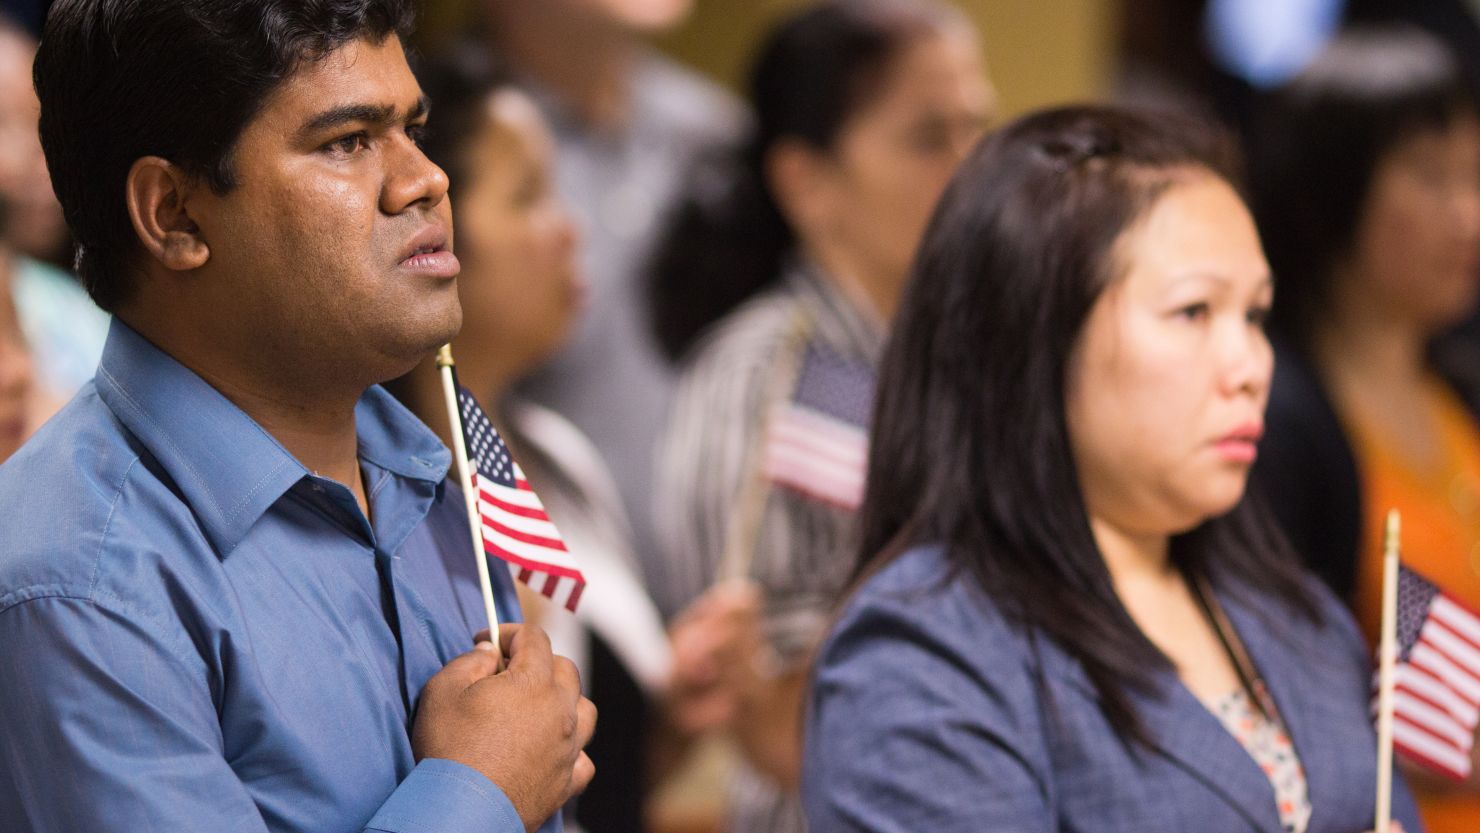 Newly naturalized Americans recite the Pledge of Allegiance at a recent ceremony in Atlanta.